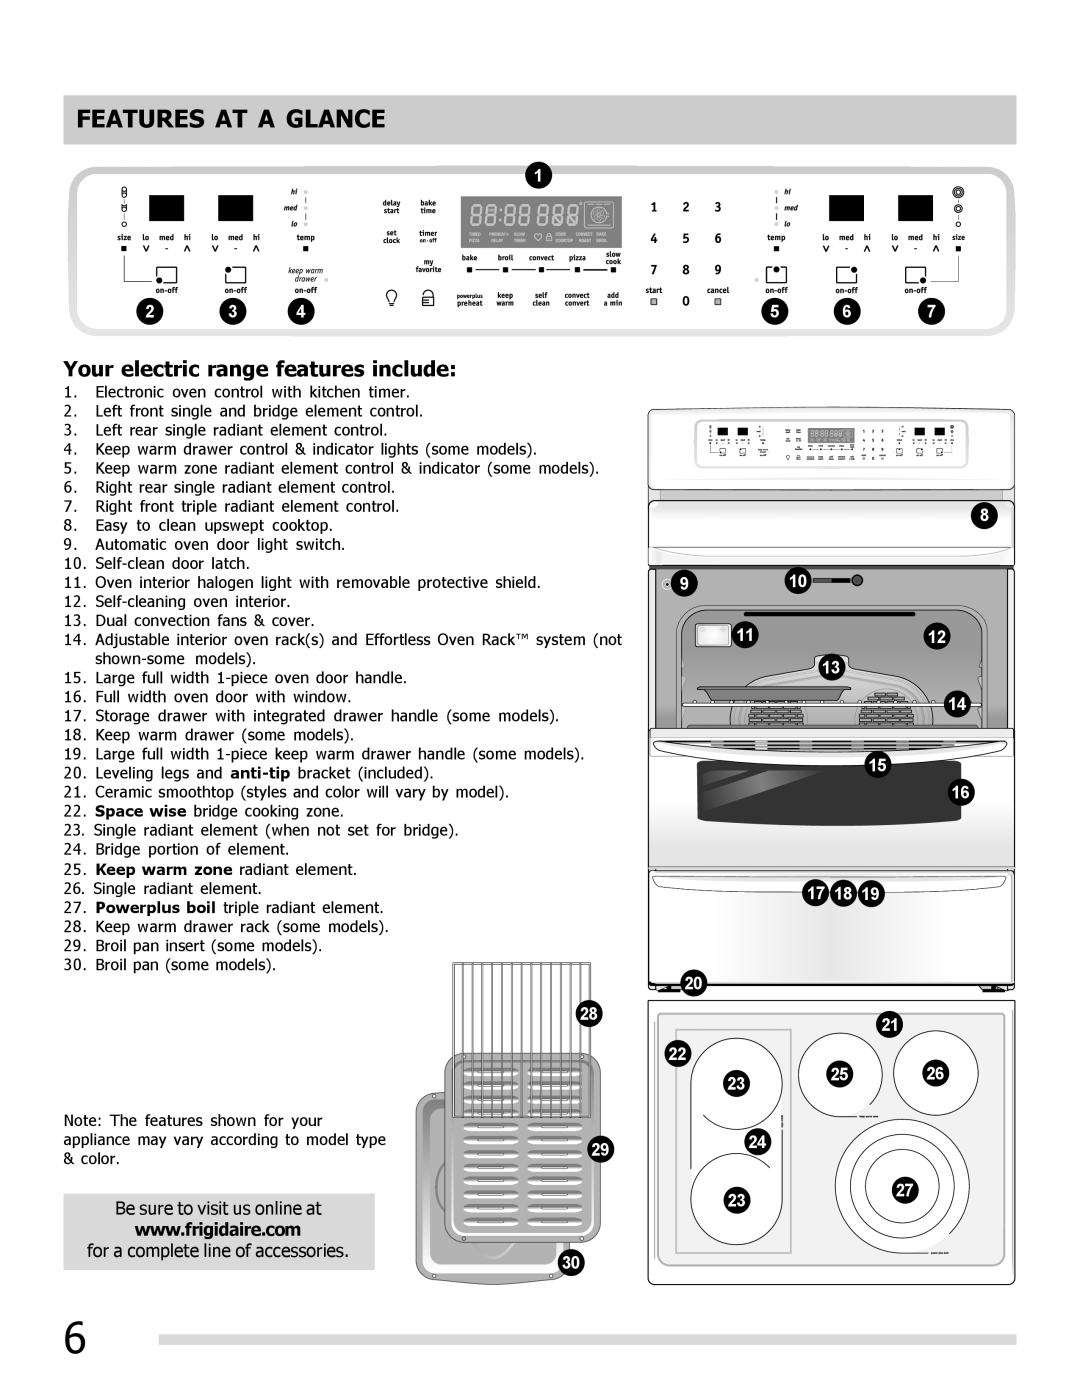 Frigidaire FPEF3081MF important safety instructions Features At A Glance, Your electric range features include 